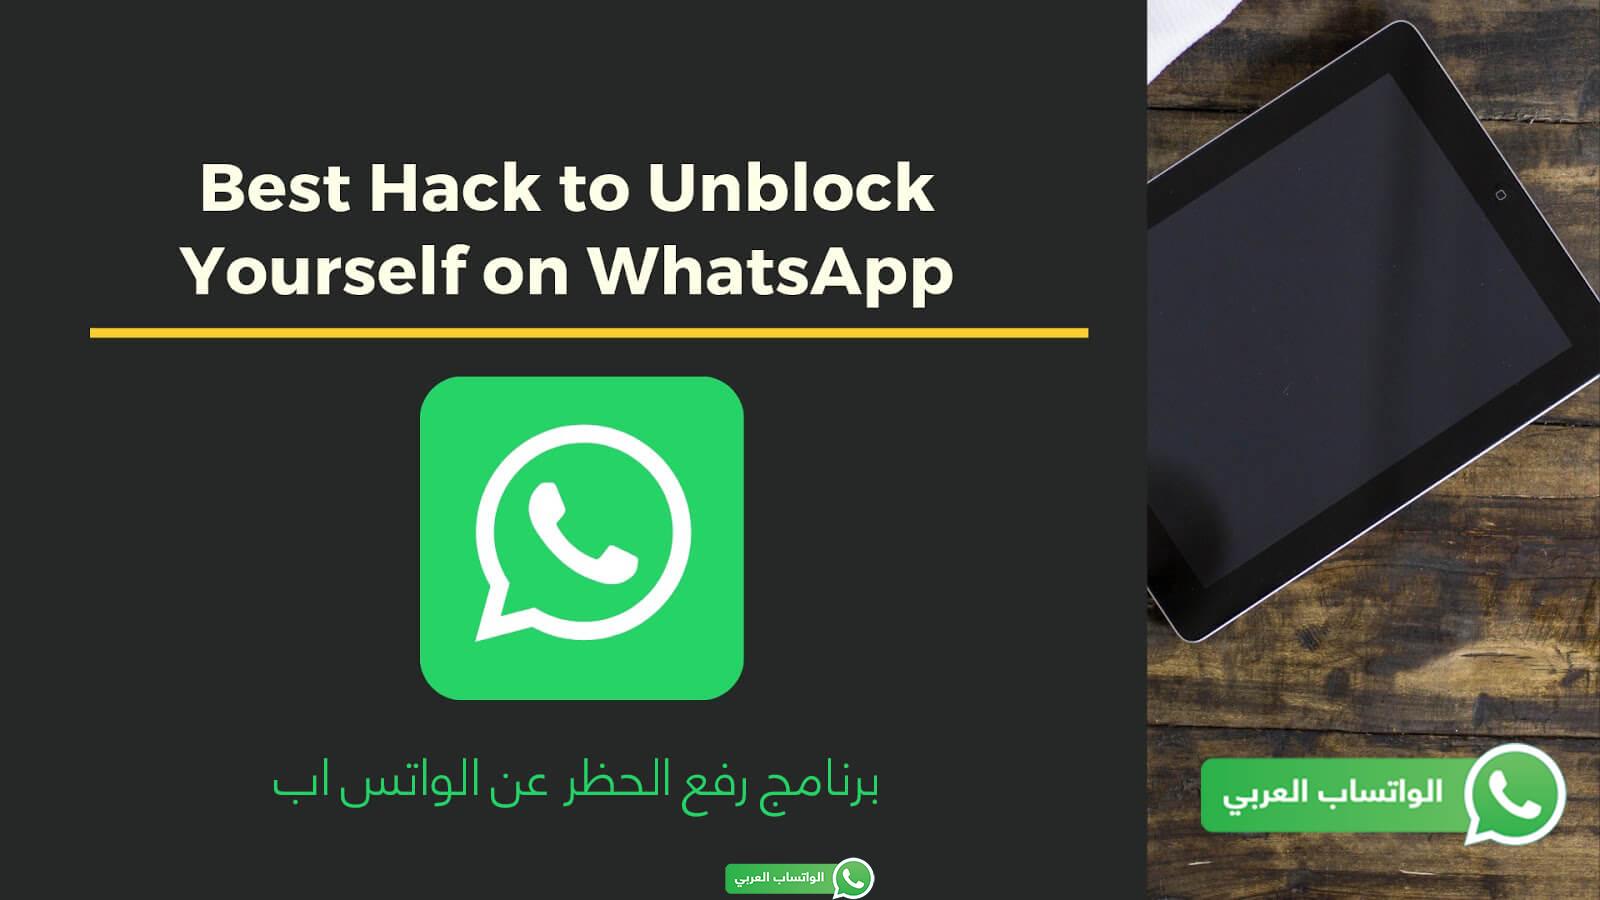 How To Unblock Yourself From WhatsApp if Someone blocked you